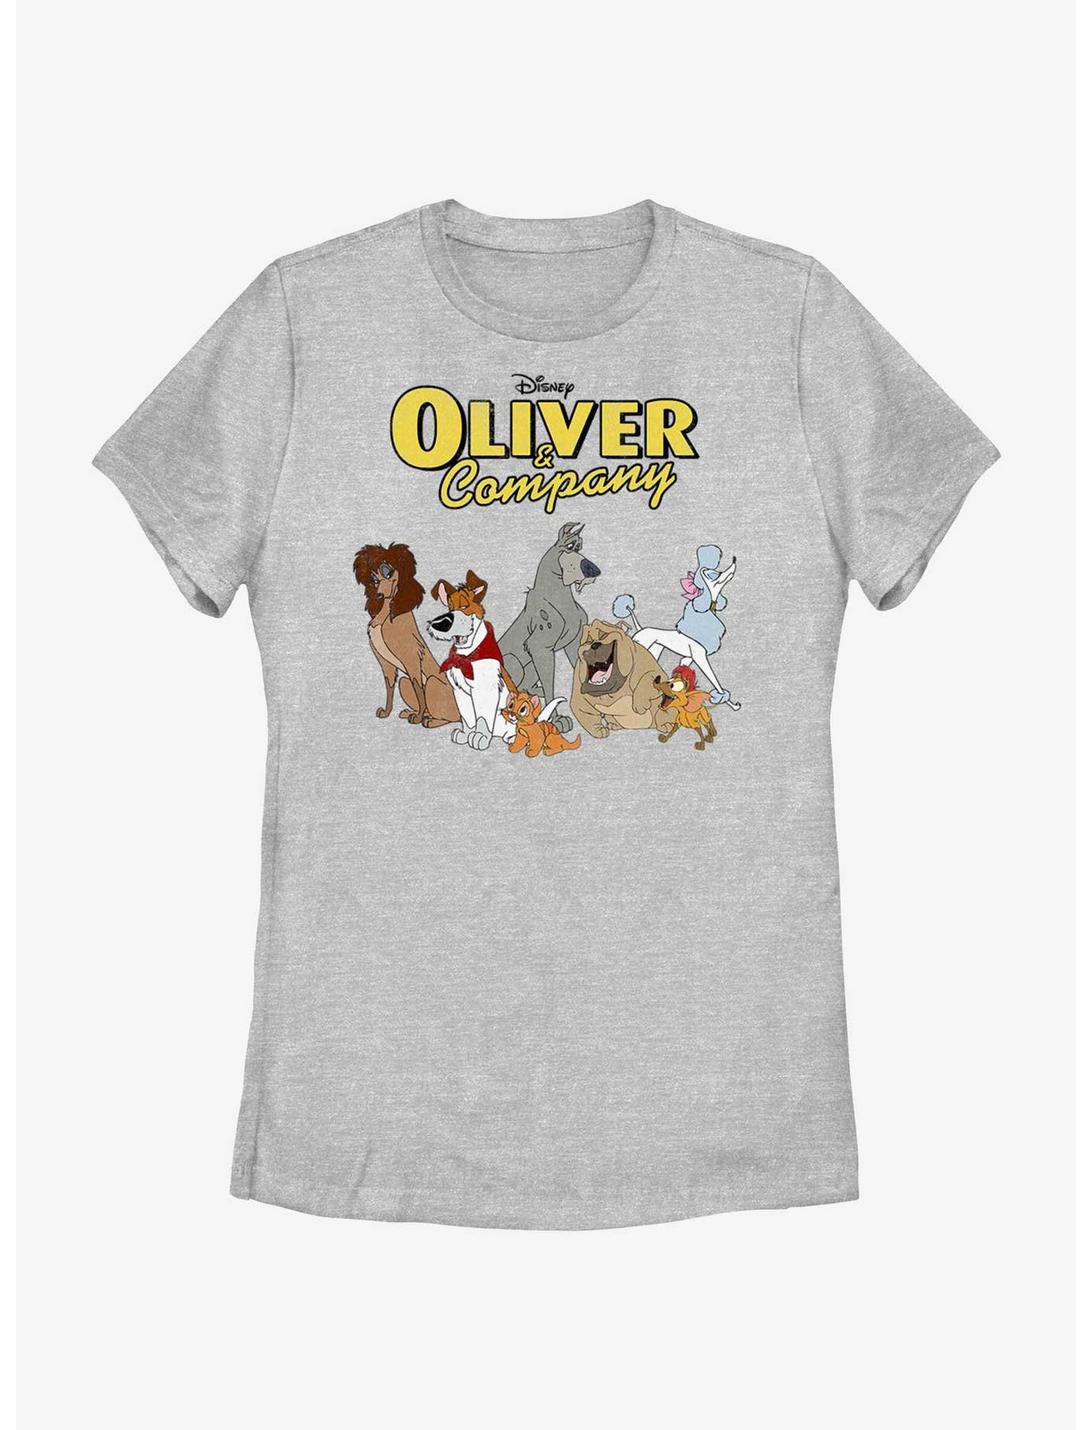 Disney Oliver & Company Who Let The Dogs Out Womens T-Shirt, ATH HTR, hi-res